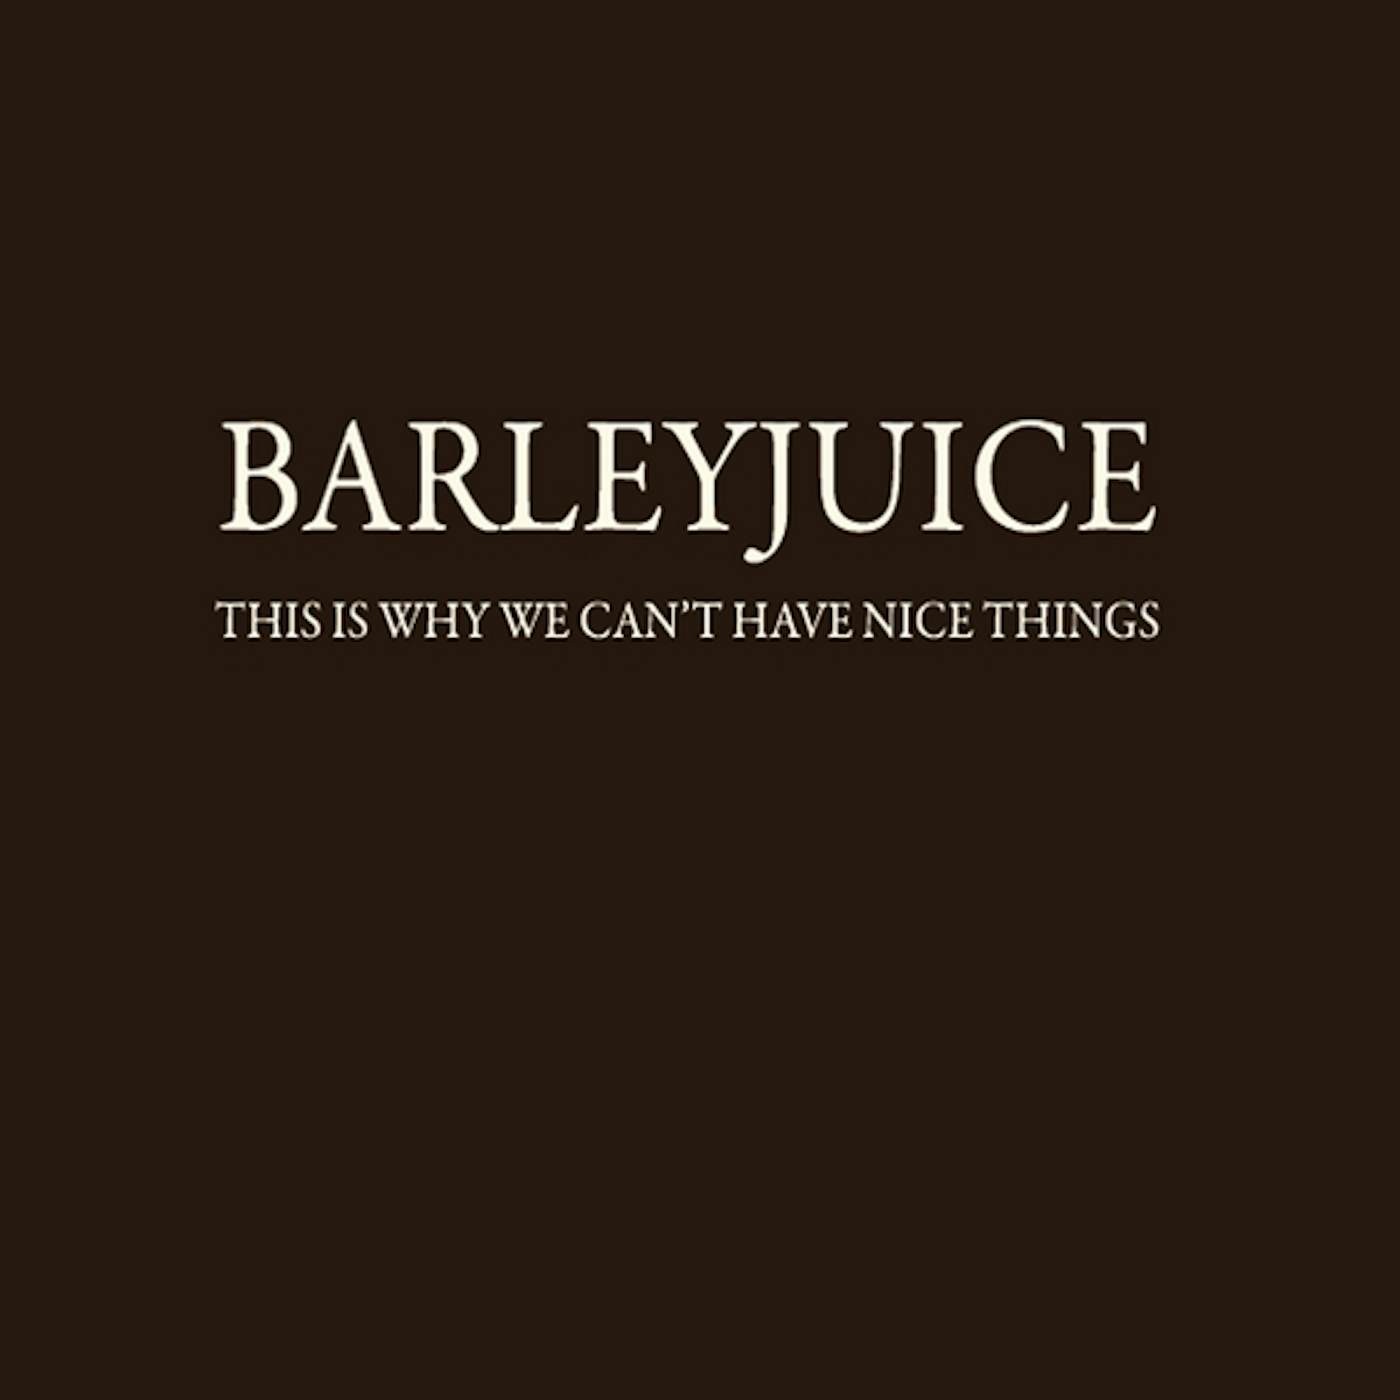 Barleyjuice THIS IS WHY WE CANT HAVE NICE THINGS CD